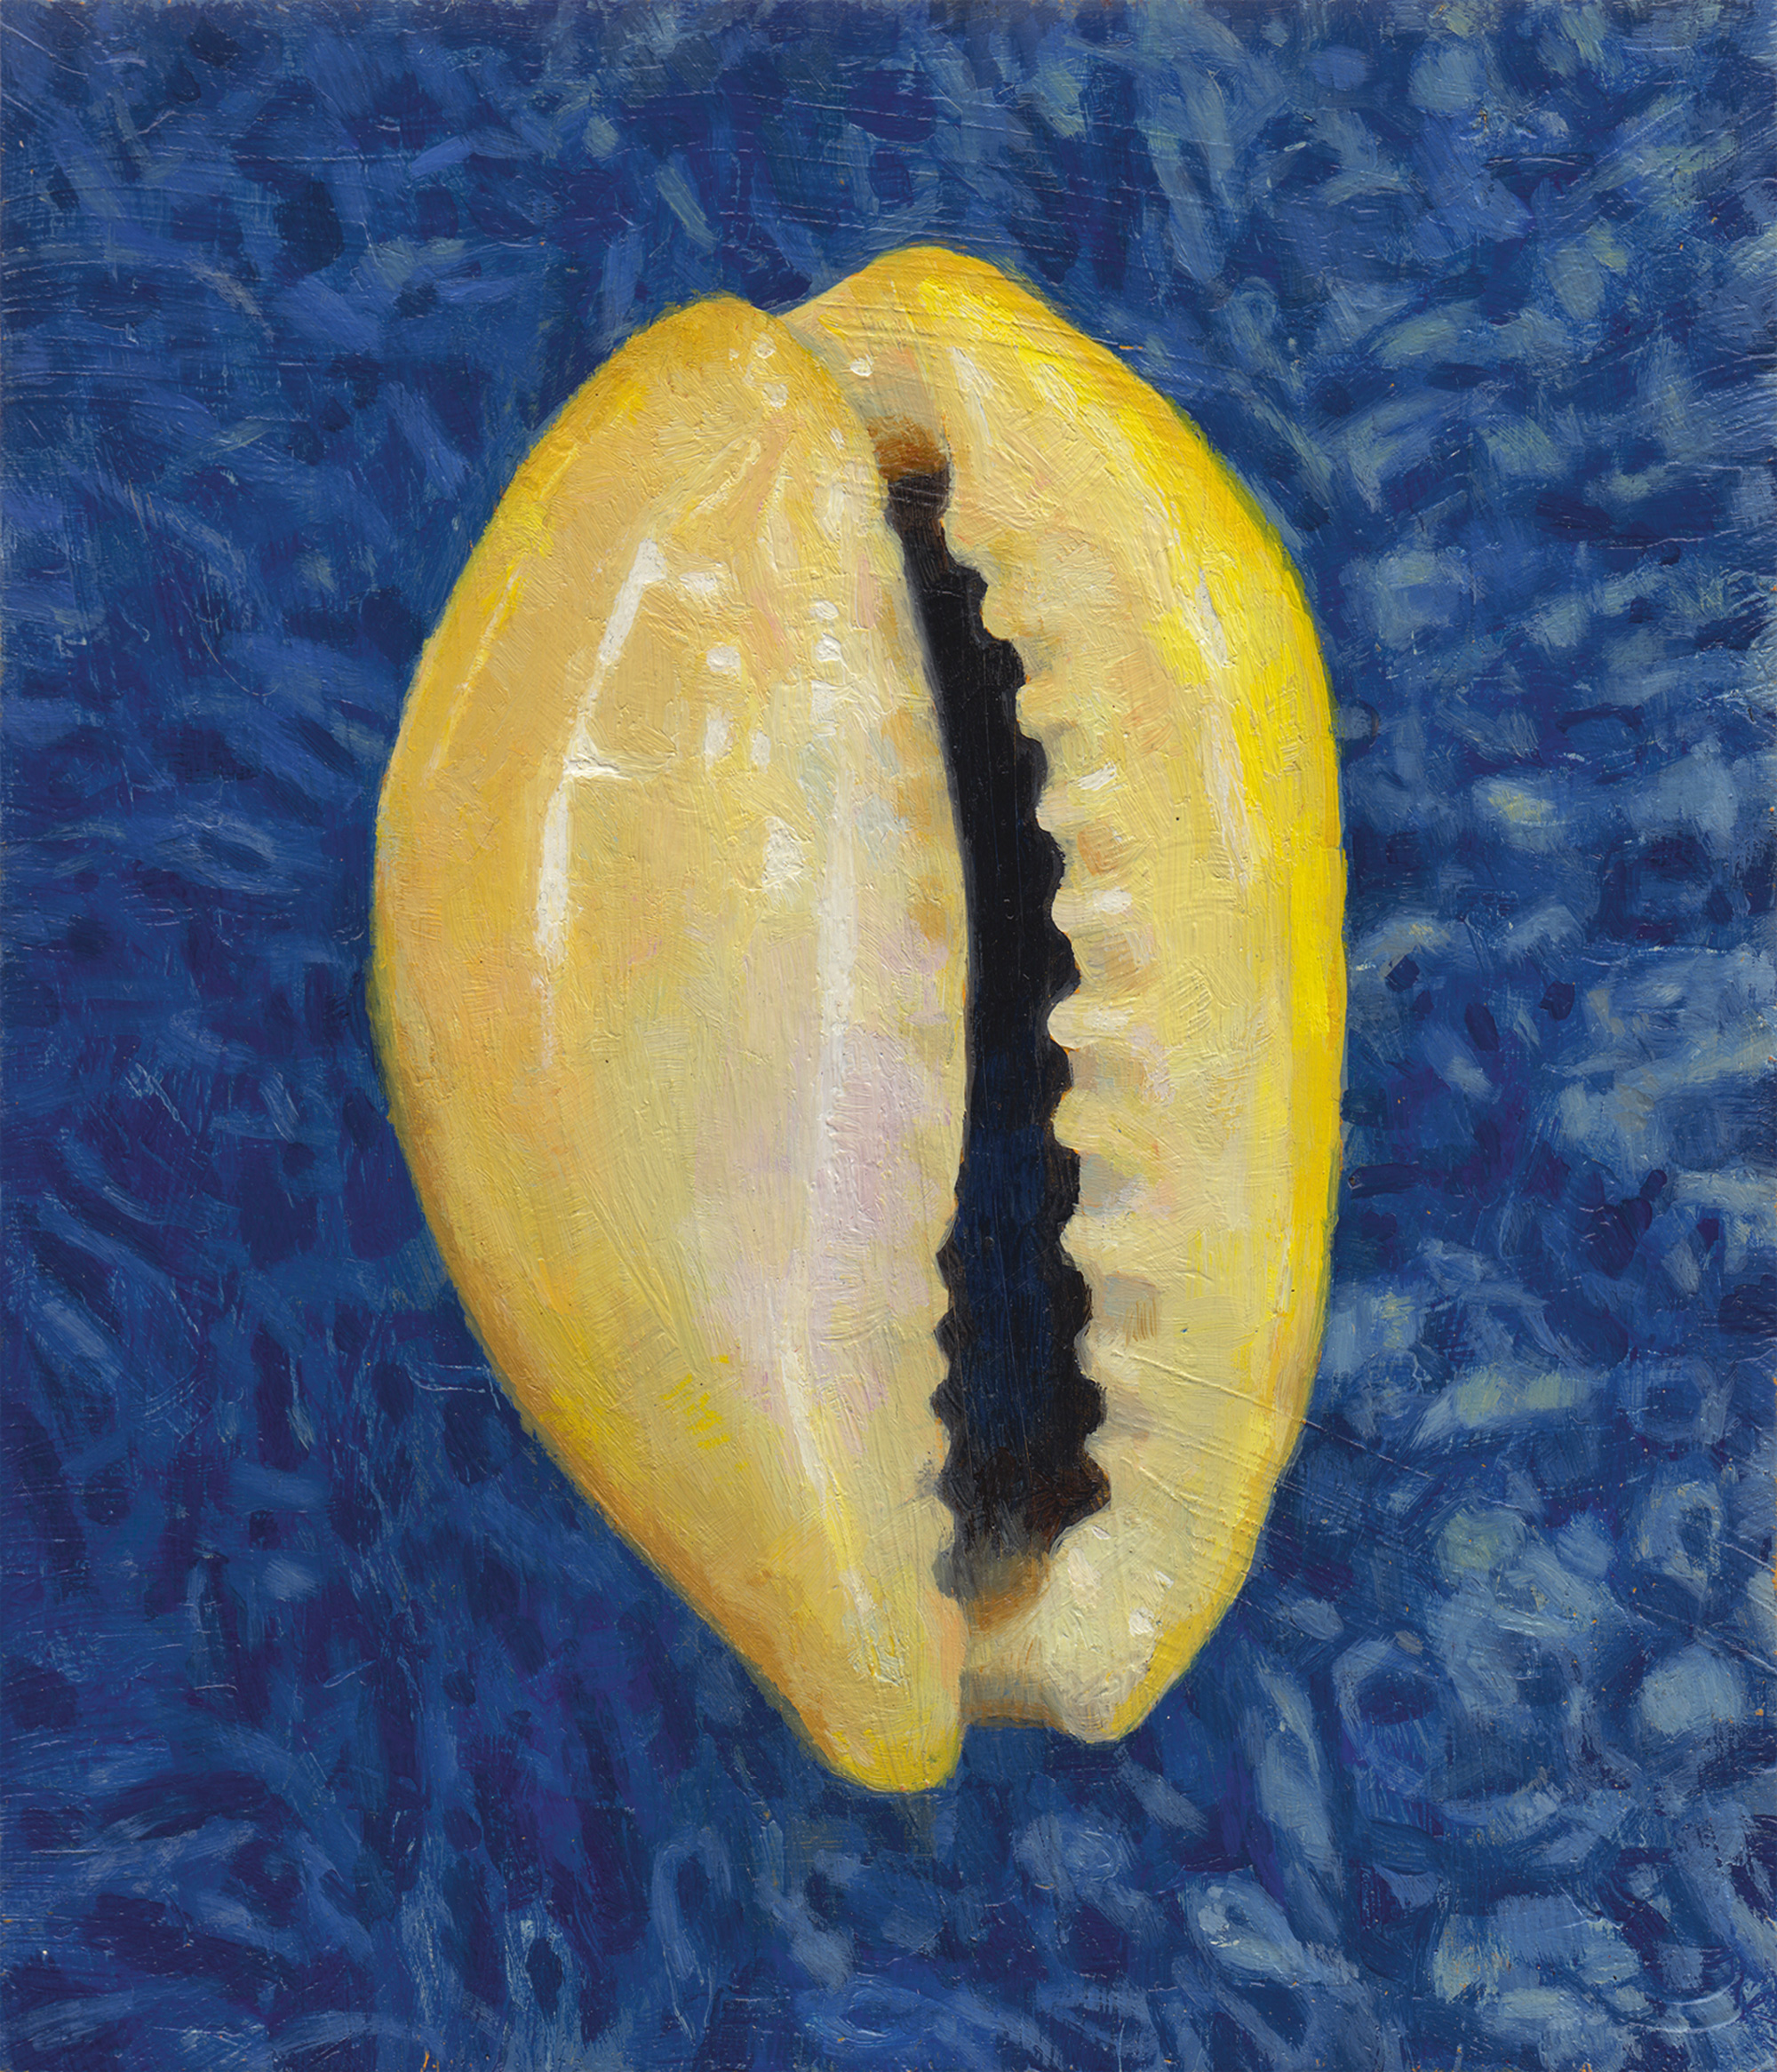 A two thousand and thirteen painting of a cowrie money shells by Conrad Bakker from his project titled “Untitled Project: eBay, Cypraea moneta.” 